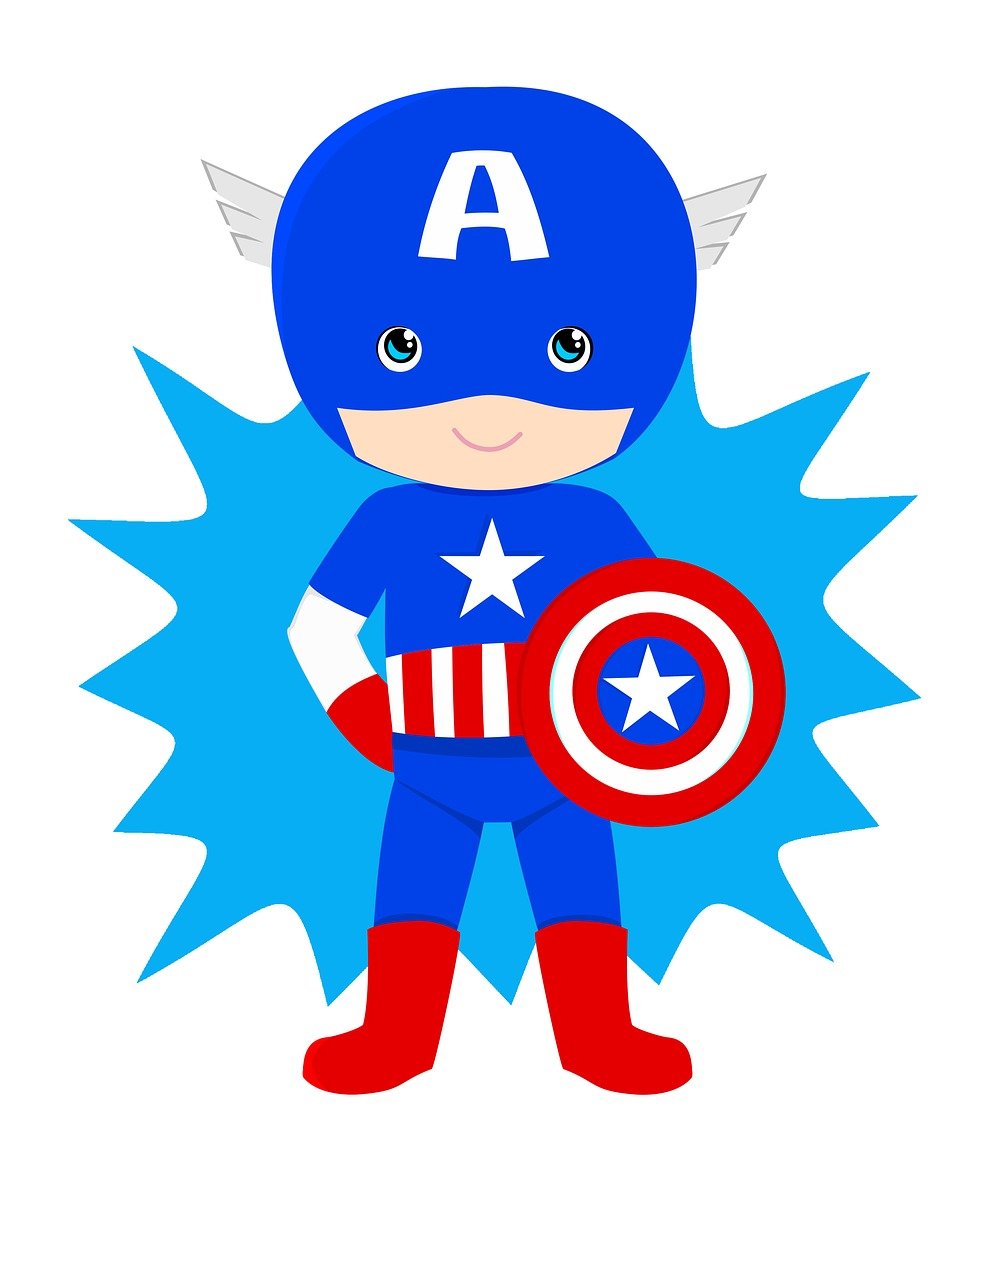 a boy in a captain costume holding a shield, by Leon Polk Smith, pop art, cute cartoon character, patriotic, super cute and friendly, costume with blue accents